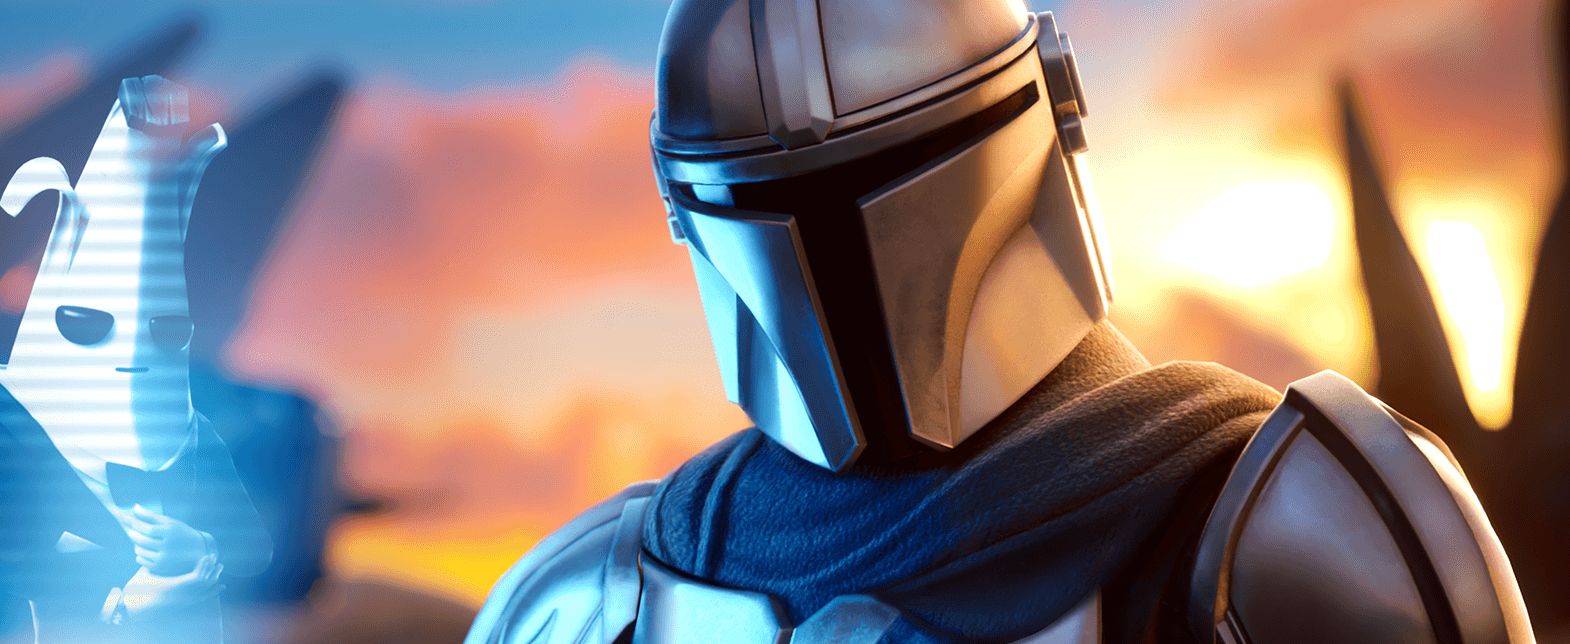 Image for Mandalorian-themed LTM comes to Fortnite